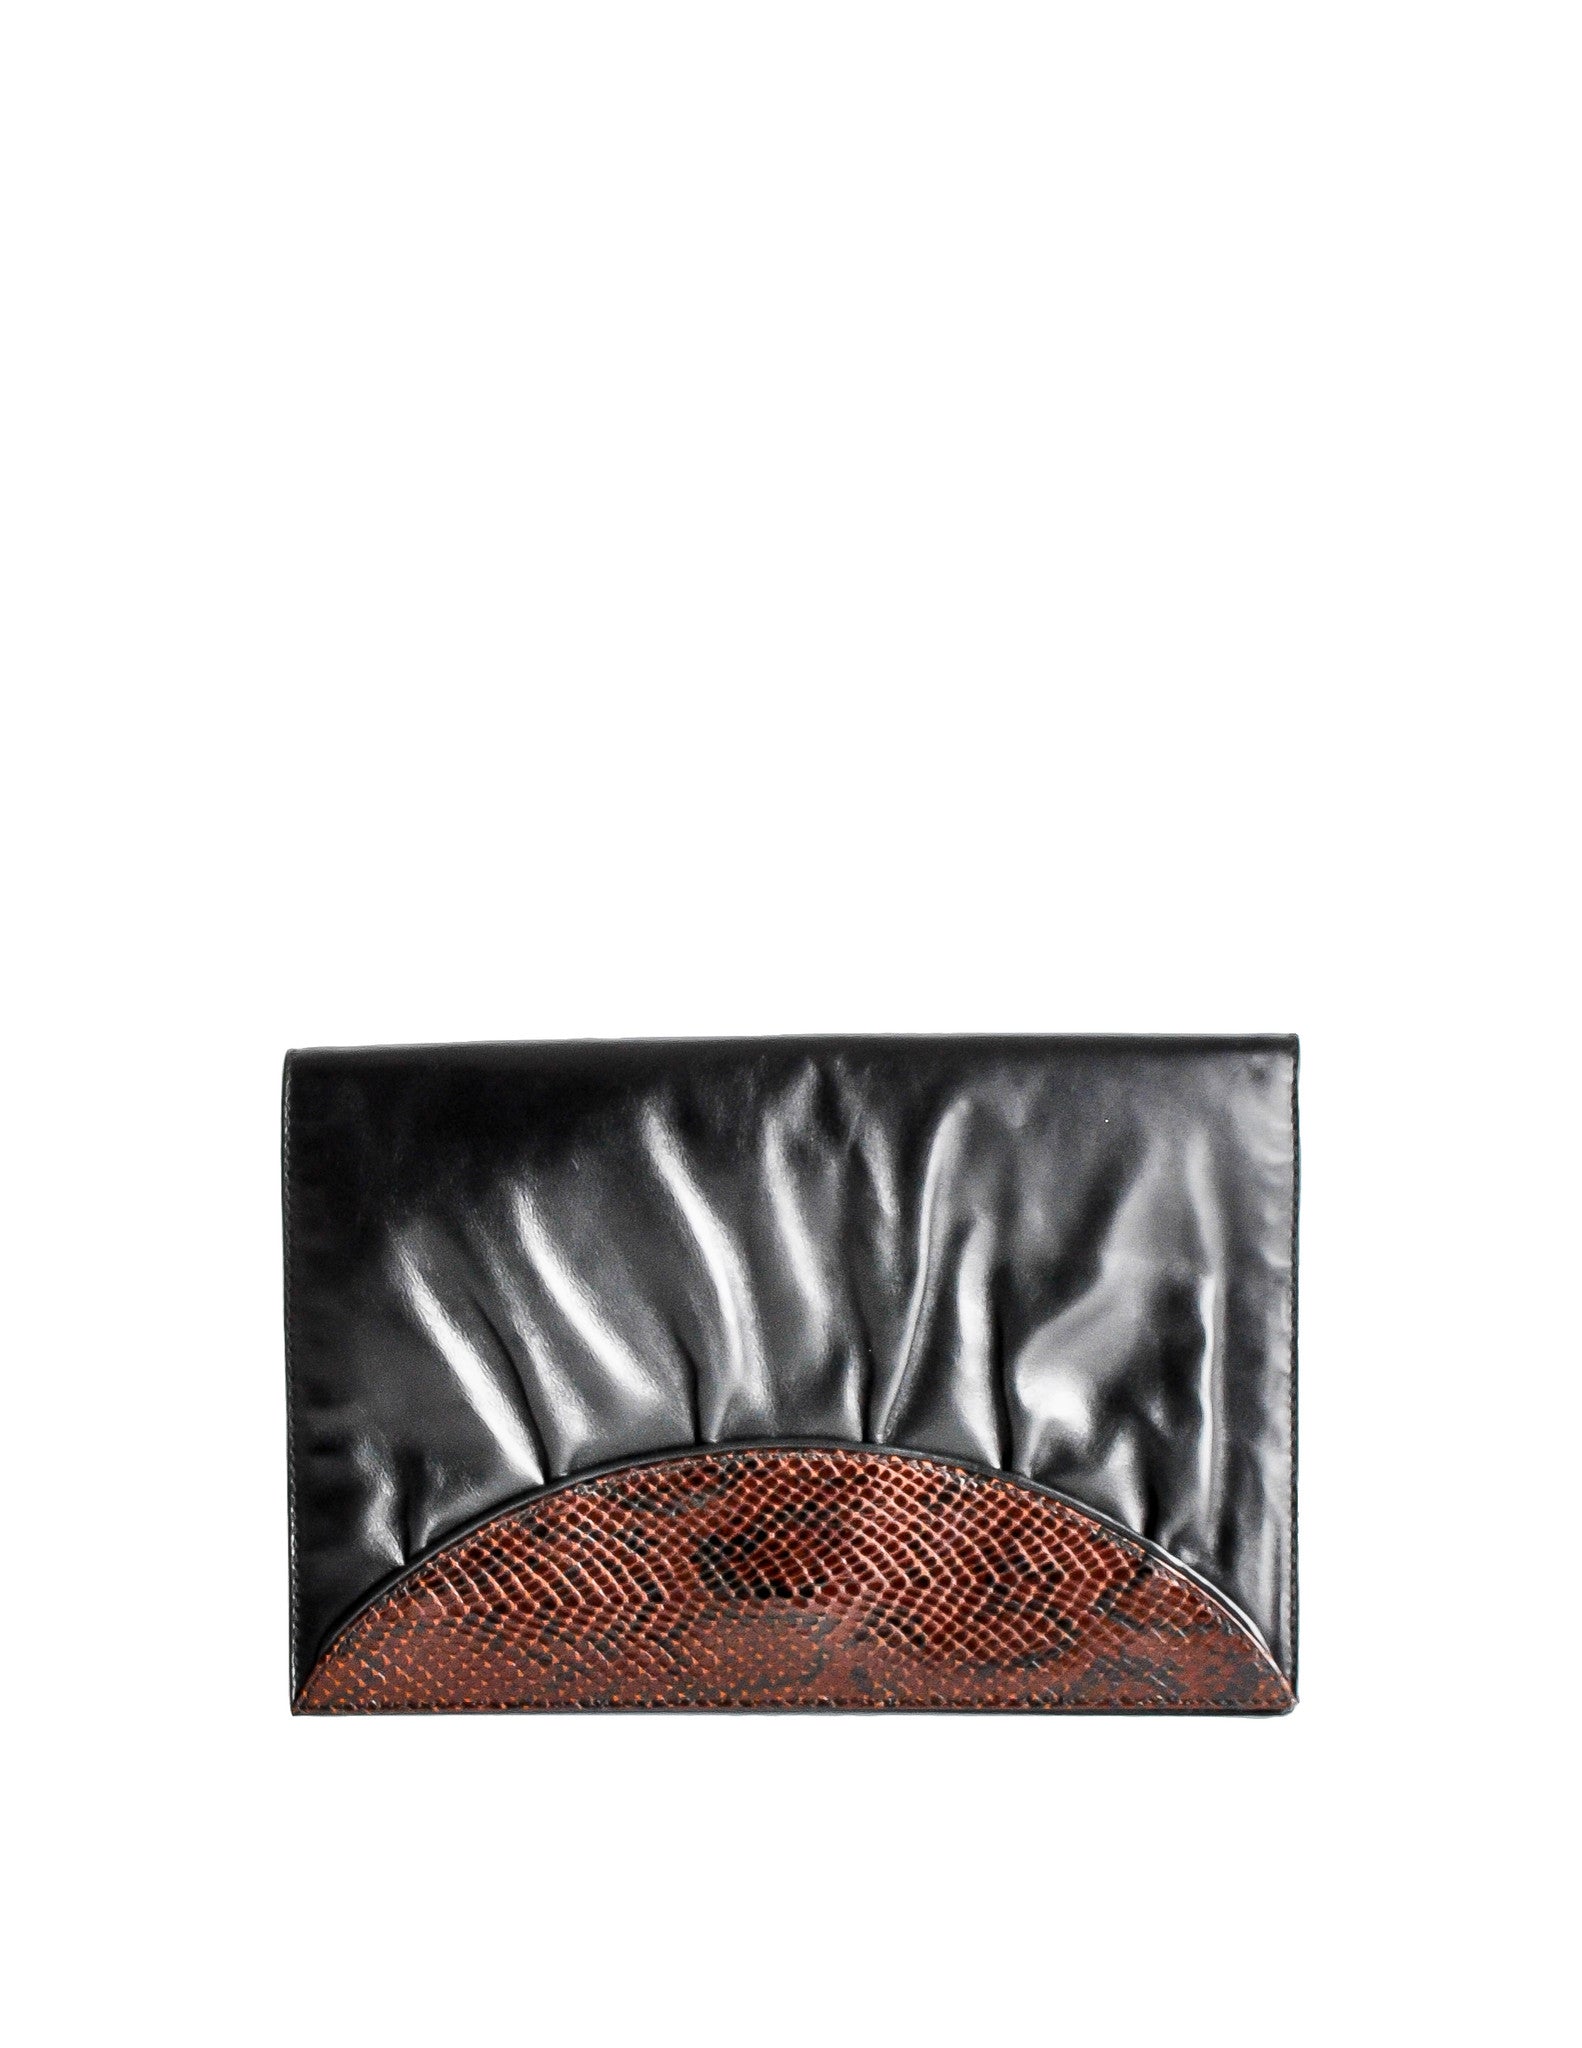 Fendi Vintage Black and Brown Leather Clutch Purse